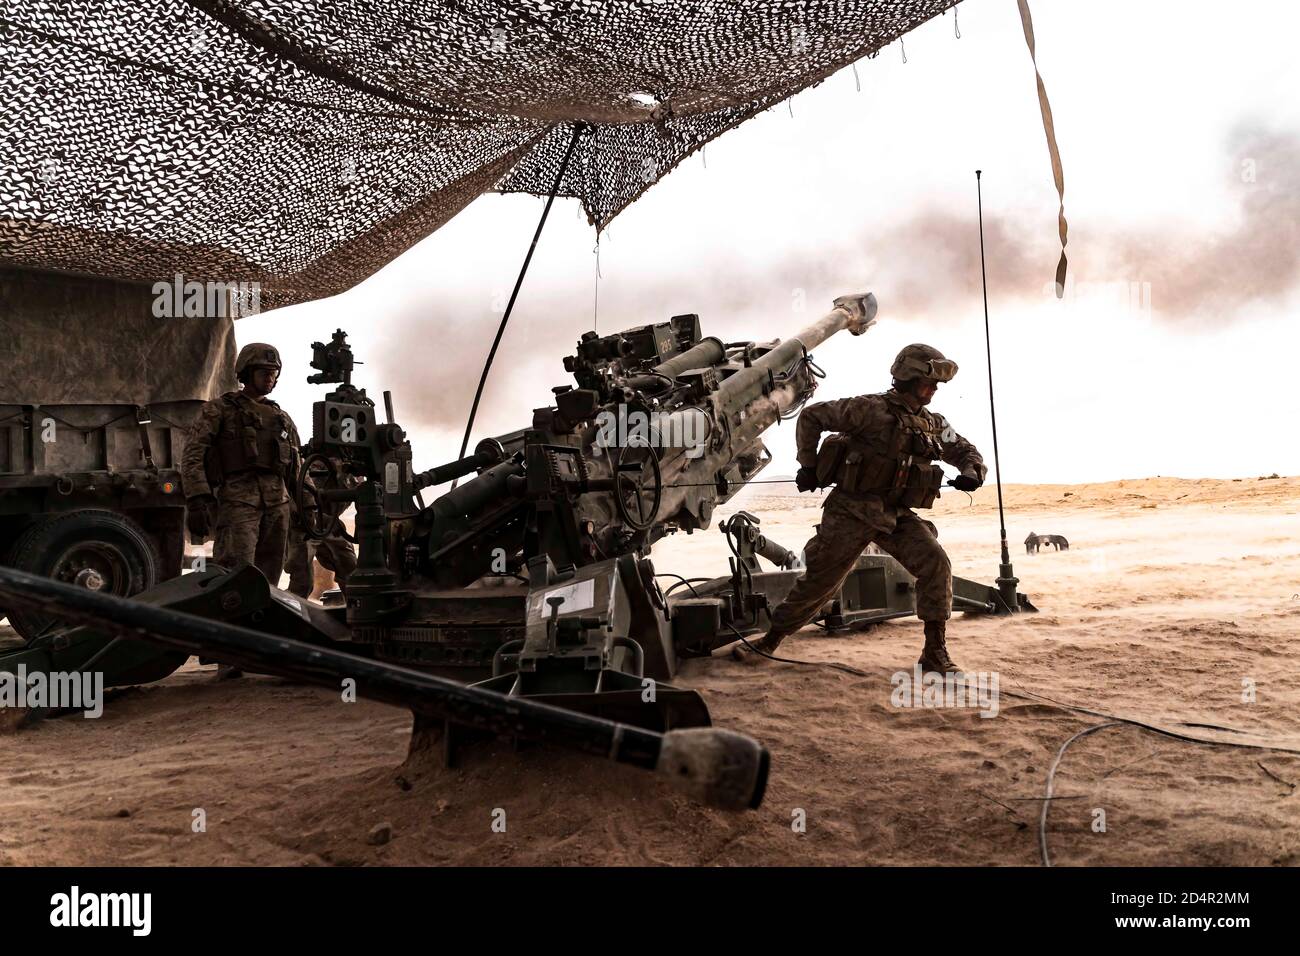 U.S. Marines with Charlie Battery, 1st Battalion, 10th Marine Regiment, 2nd Marine Division, fire a M777 Howitzer during Integrated Training Exercise (ITX) 2-20 at Marine Corps Air Ground Combat Center, Twentynine Palms, Calif., Jan. 20, 2020. The purpose of ITX is to create a challenging, realistic training environment that produces combat-ready forces and to prepare units for their role in the Marine Air Ground Task Force Warfighting Exercise. (U.S. Marine Corps photo by Lance Cpl. Colton Brownlee) Stock Photo